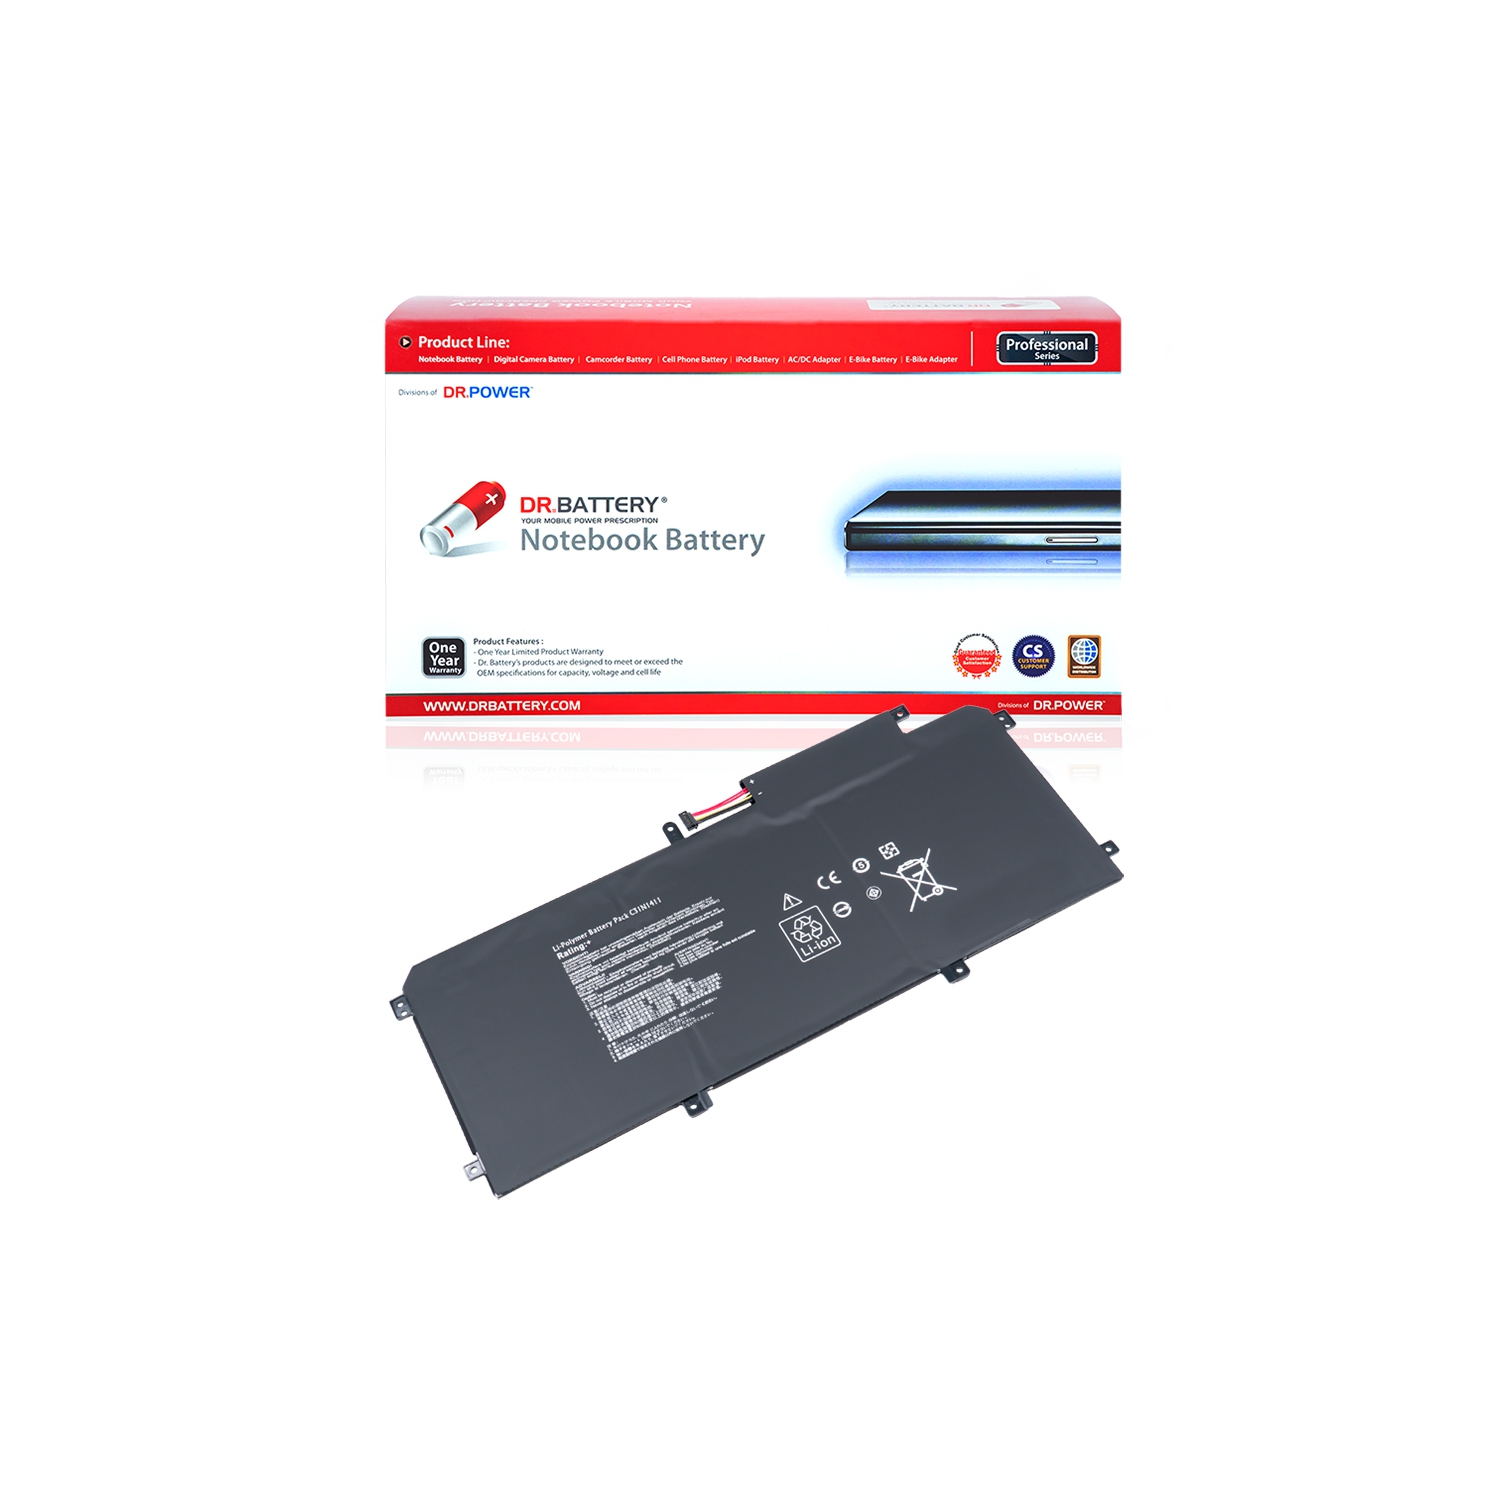 DR. BATTERY - Replacement for Asus ZenBook UX305CA-1B / UX305CA-1C / UX305CA-2A / UX305CA-2C / 0B200-01180000 / C31N1411 [11.4V / 3830mAh / 43.6Wh] ***Free Shipping***